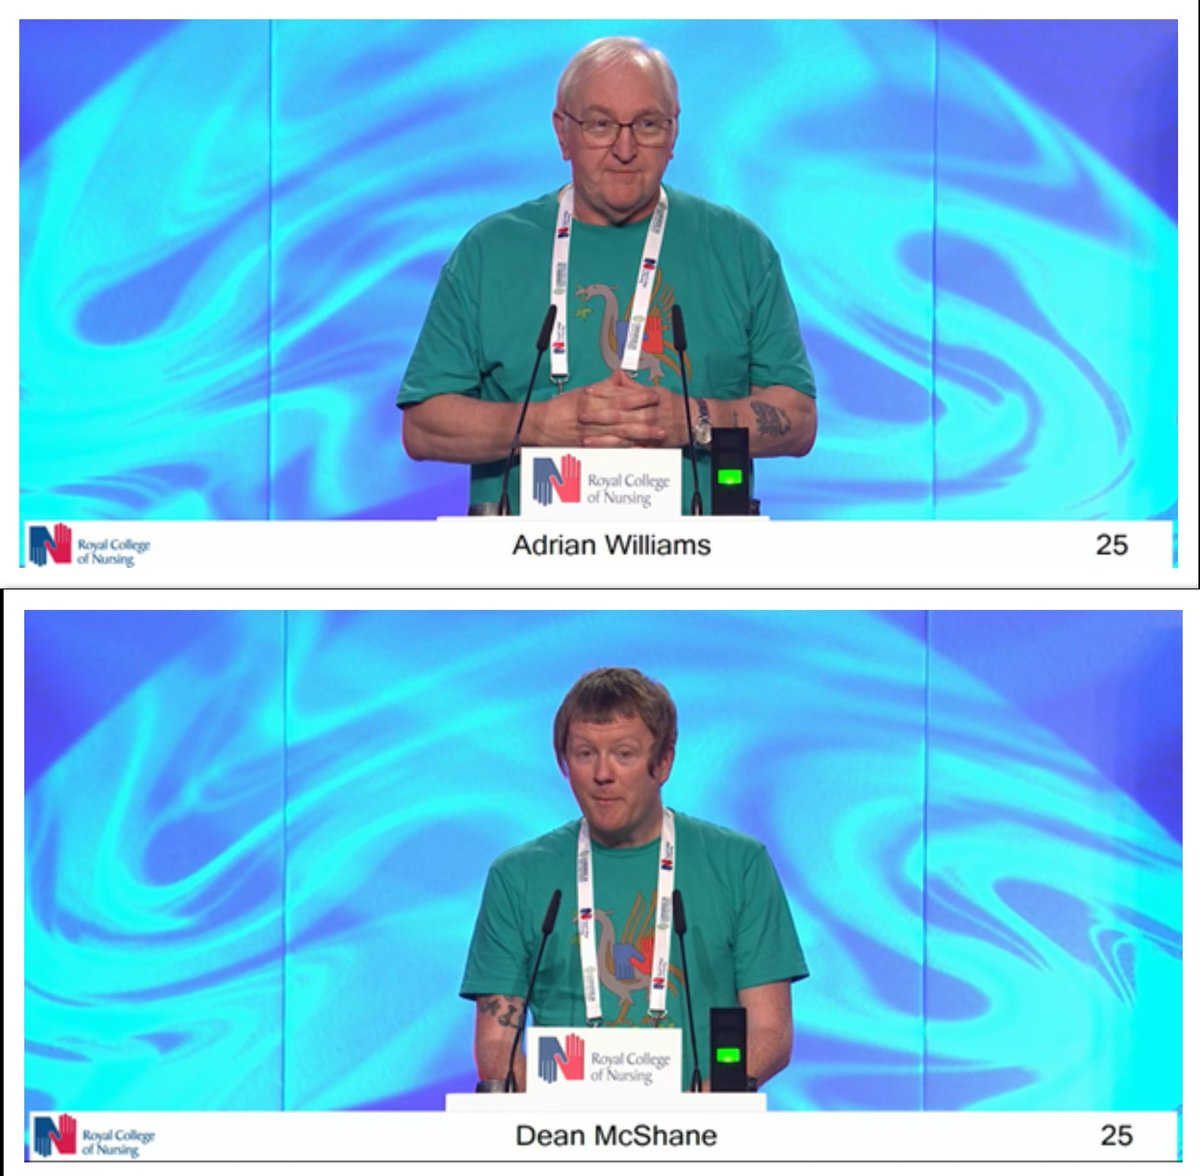 RCN Greater Liverpool and Knowsley members Dean McShane and Adrian Williams taking to the podium at #RCNCongress to discuss the positive impact AI can have on the health and care sector including the diagnosis and management of dementia.